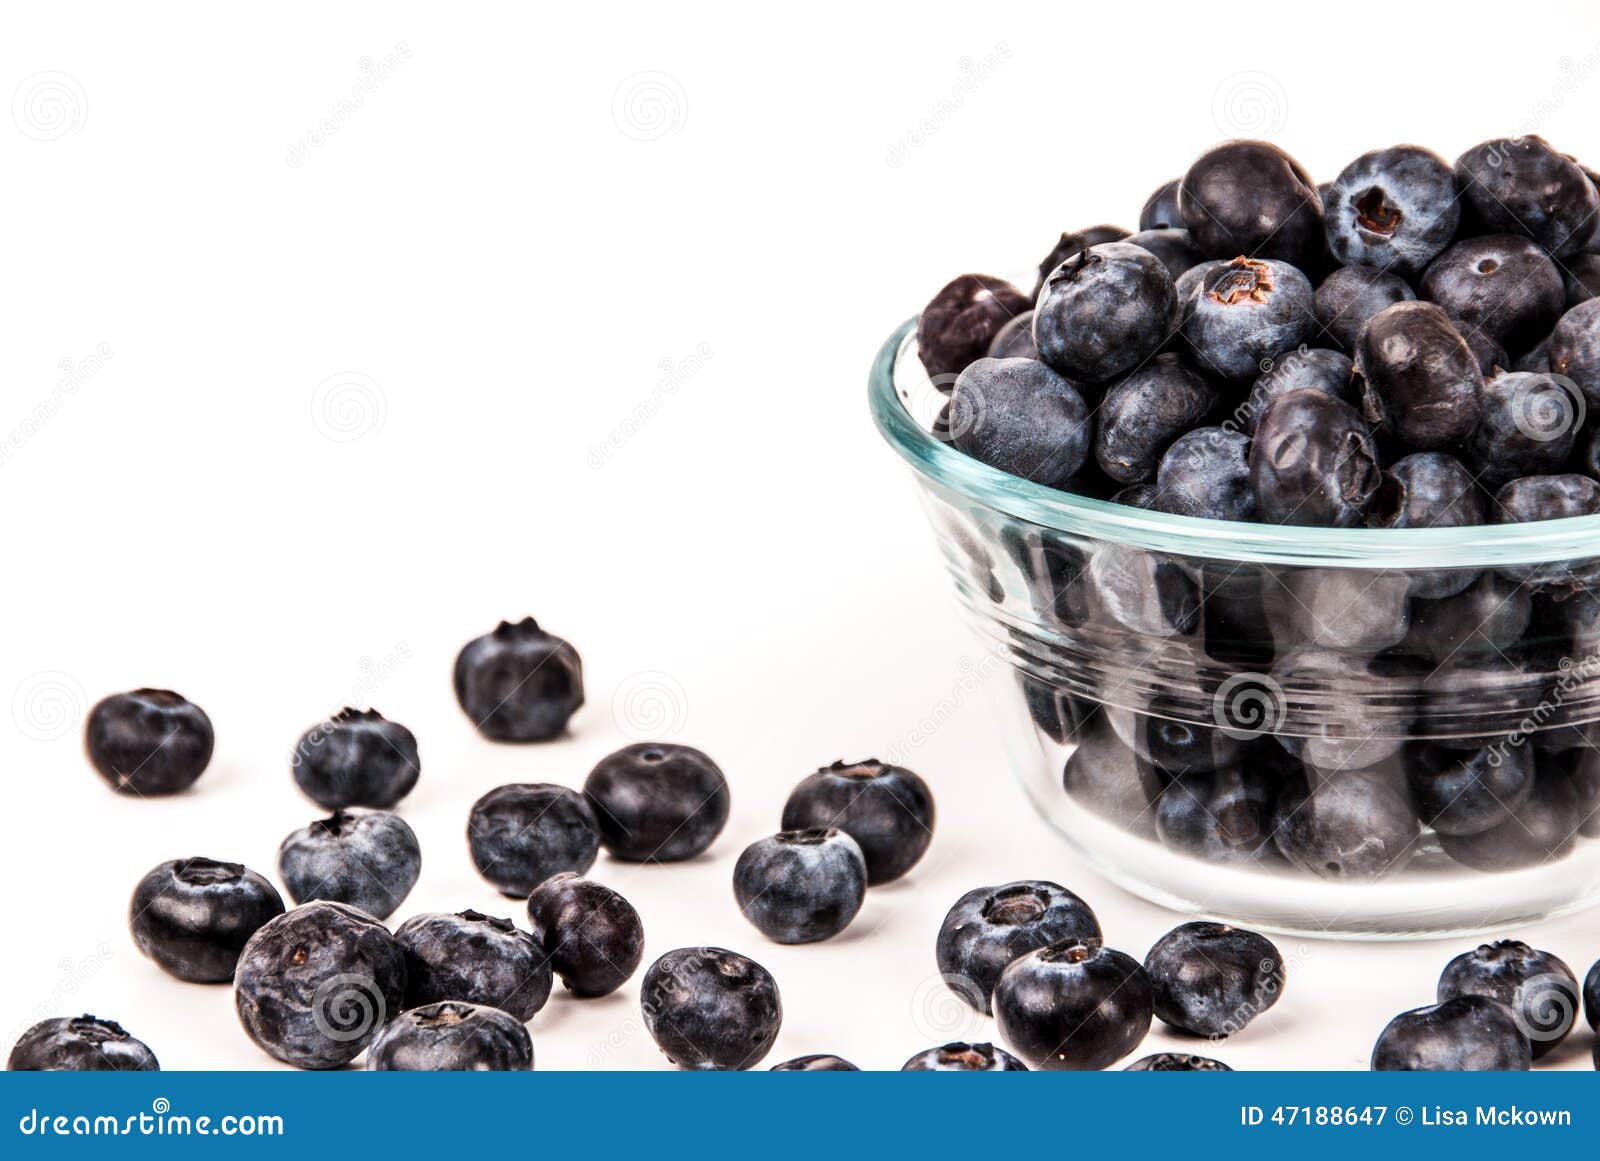 Blueberries in a Bowl Isolated on White Stock Image - Image of isolated ...